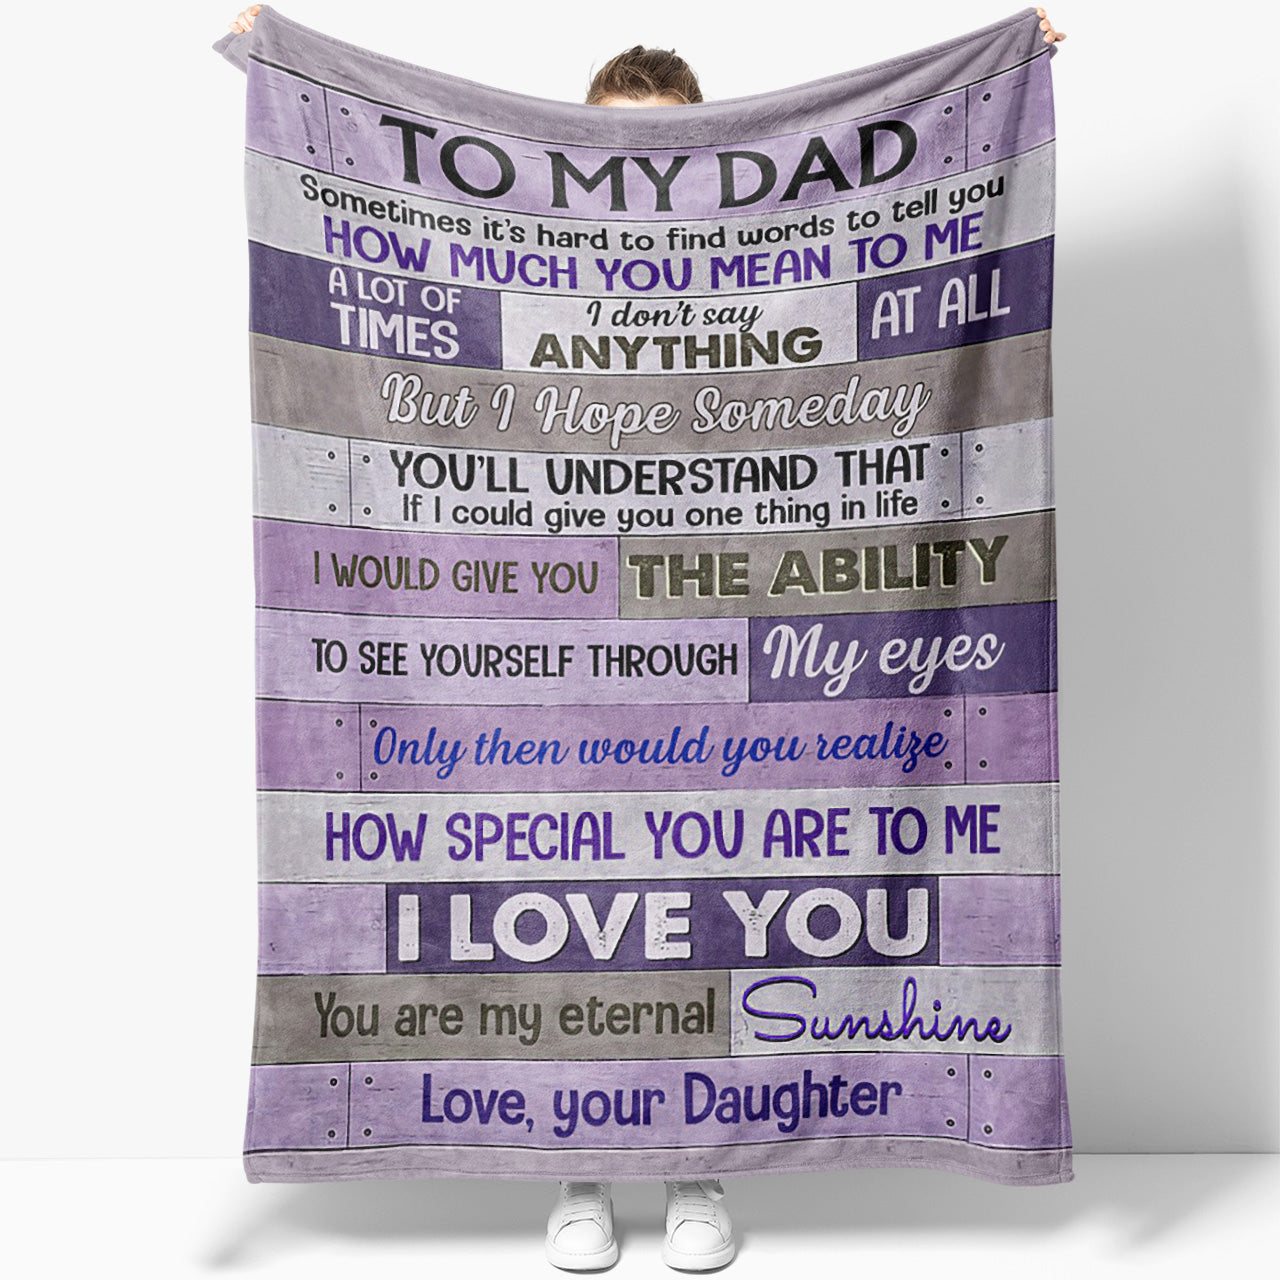 Blanket Gift Ideas for Dad, How Much You Mean to Me Blanket for Father's Day